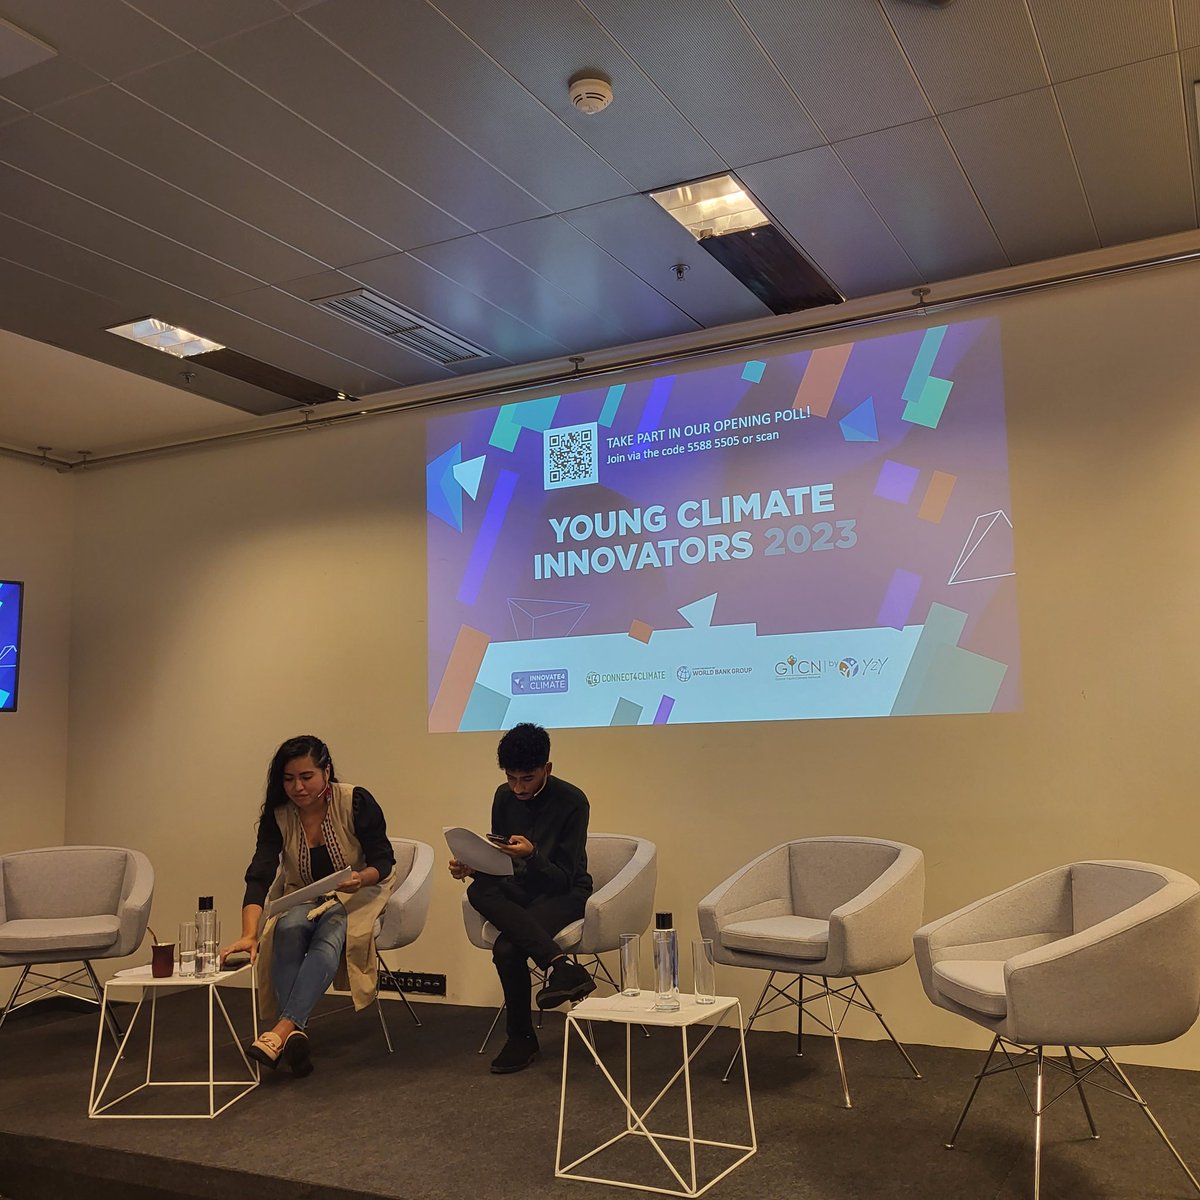 Excited to be part of the #Youngclimateinnovators2023 taking part in the @worldbank #innovate4climate #I4C in Bilbao Spain! It's just starting off now. More details here: linktr.ee/i4c2023